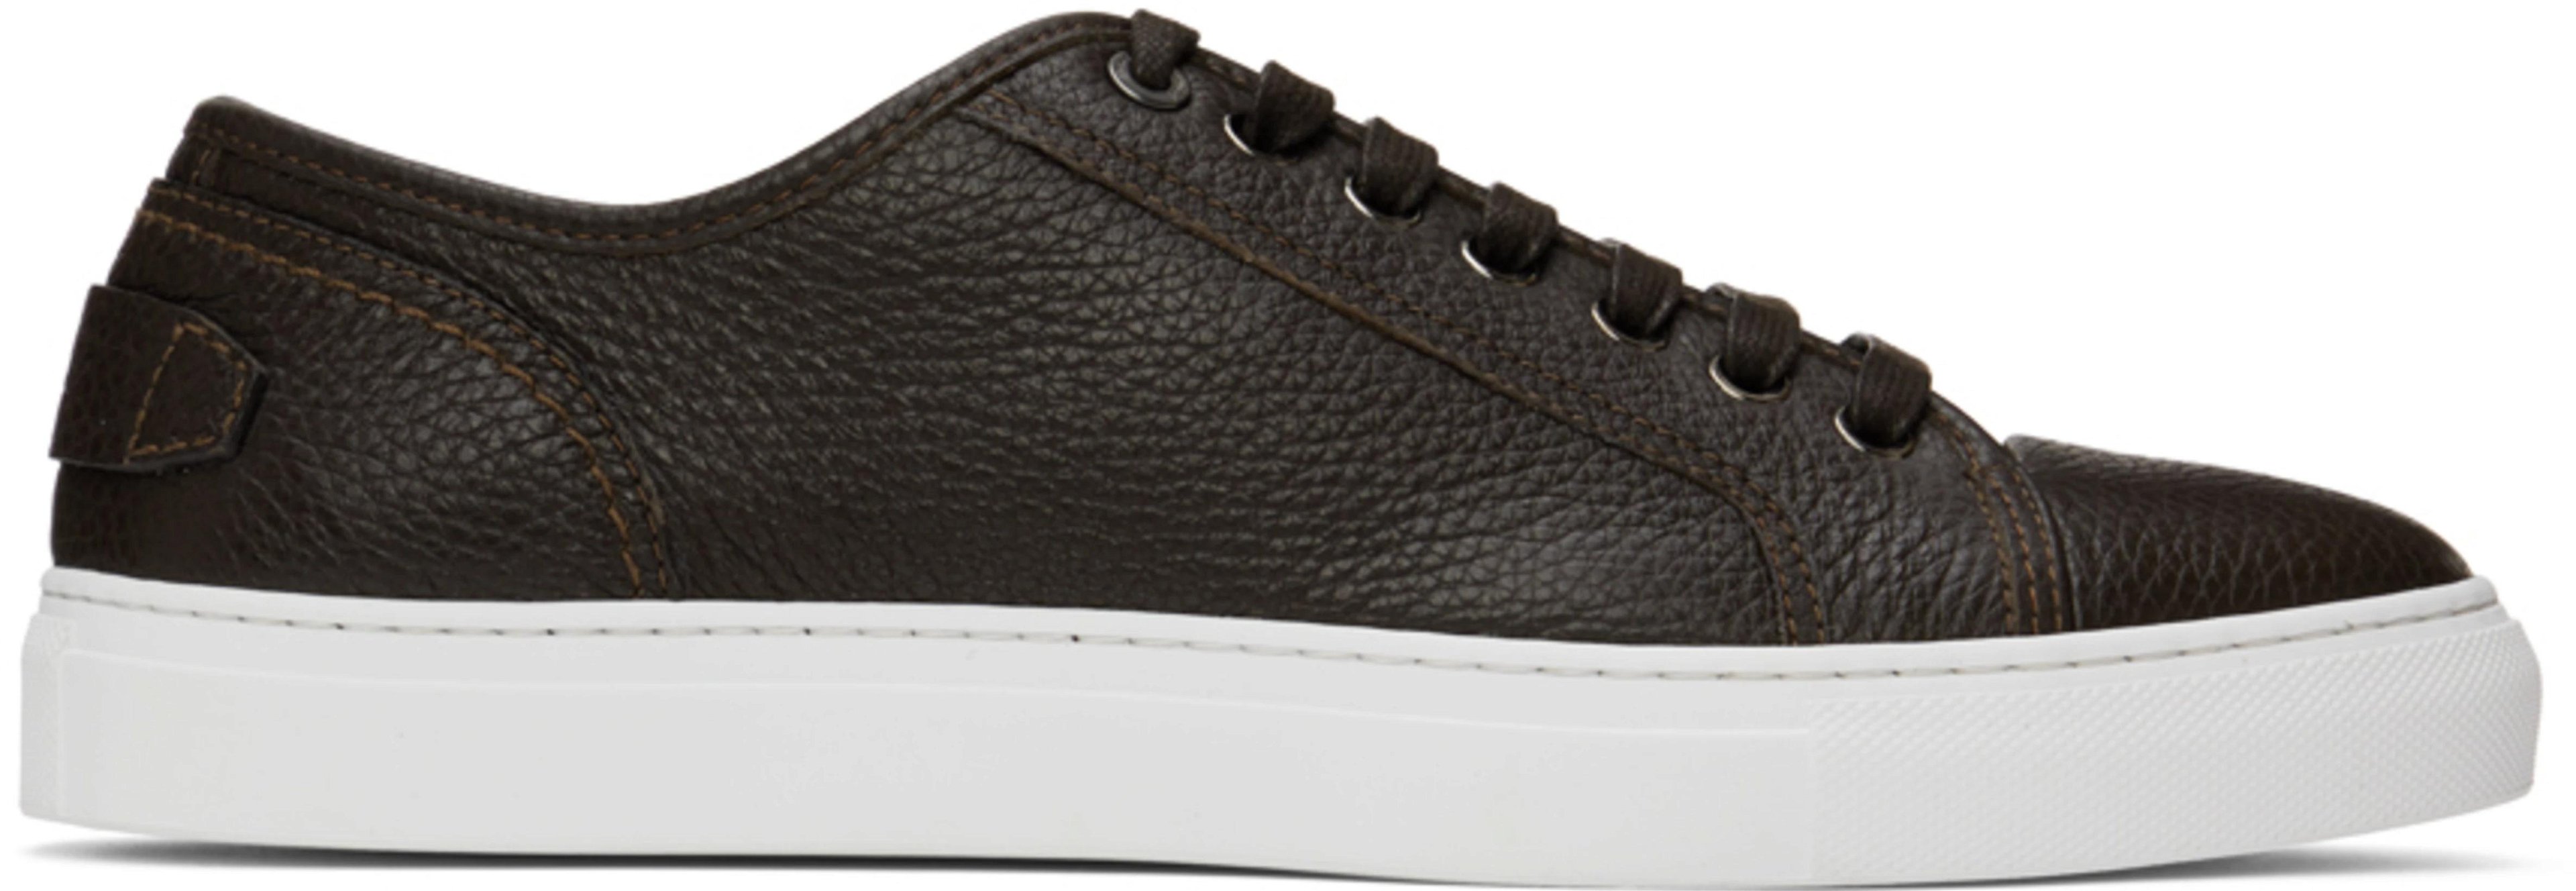 Brown Leather Sneakers by BRIONI